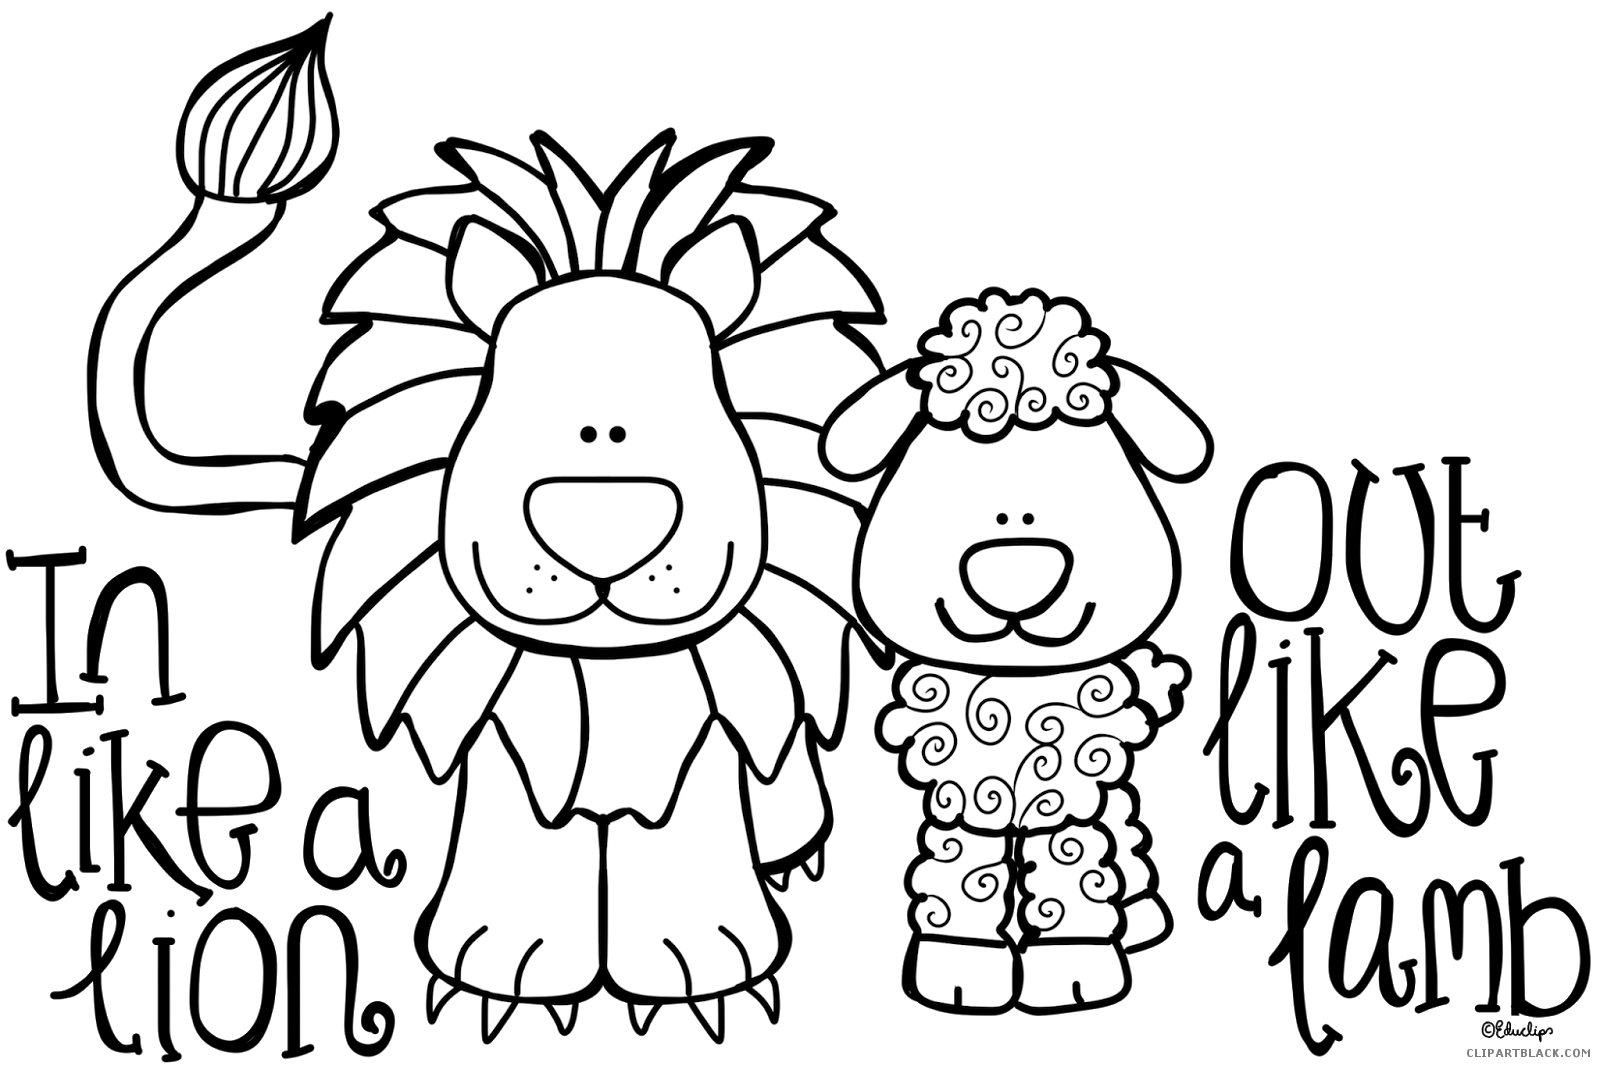 Clipart lion black and white. Page of clipartblack com